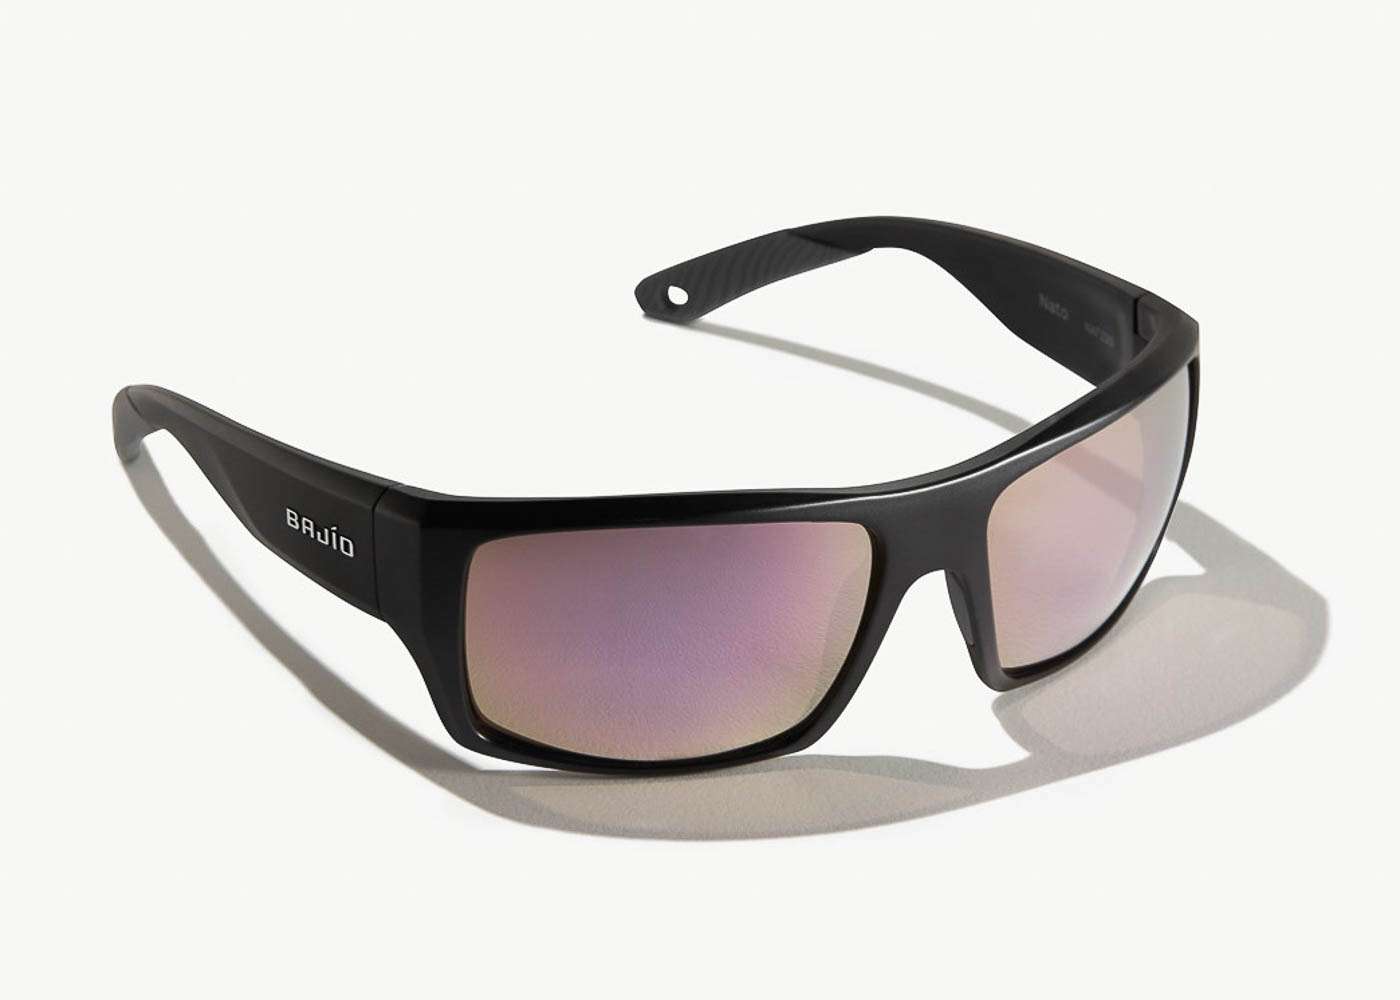 <p><strong>Bajio Nato Sunglasses</strong></p><p>Nato is a bold, squared statement frame that employs oversized temples to block side light and keep the focus on whatâs ahead. Available in six different lens colors, all featuring Bajioâs LAPIS polarized lens technology that cuts through glare for better fish-spotting. Blue light-blocking coating prevents eye fatigue to maintain visual acuity during marathon days in the sun. This technology blocks 95% of harmful blue light. All BajÃ­o lenses are also equipped with front and back oleophobic coatings that increase durability and make lens cleaning easier. Paired with the Drum lens, Nato is perfect for spotting fish on tree covered rivers and lakes, and on days when the sun peeks in and out. $199 Plastic Lenses. $249 Glass Lenses. <a href=